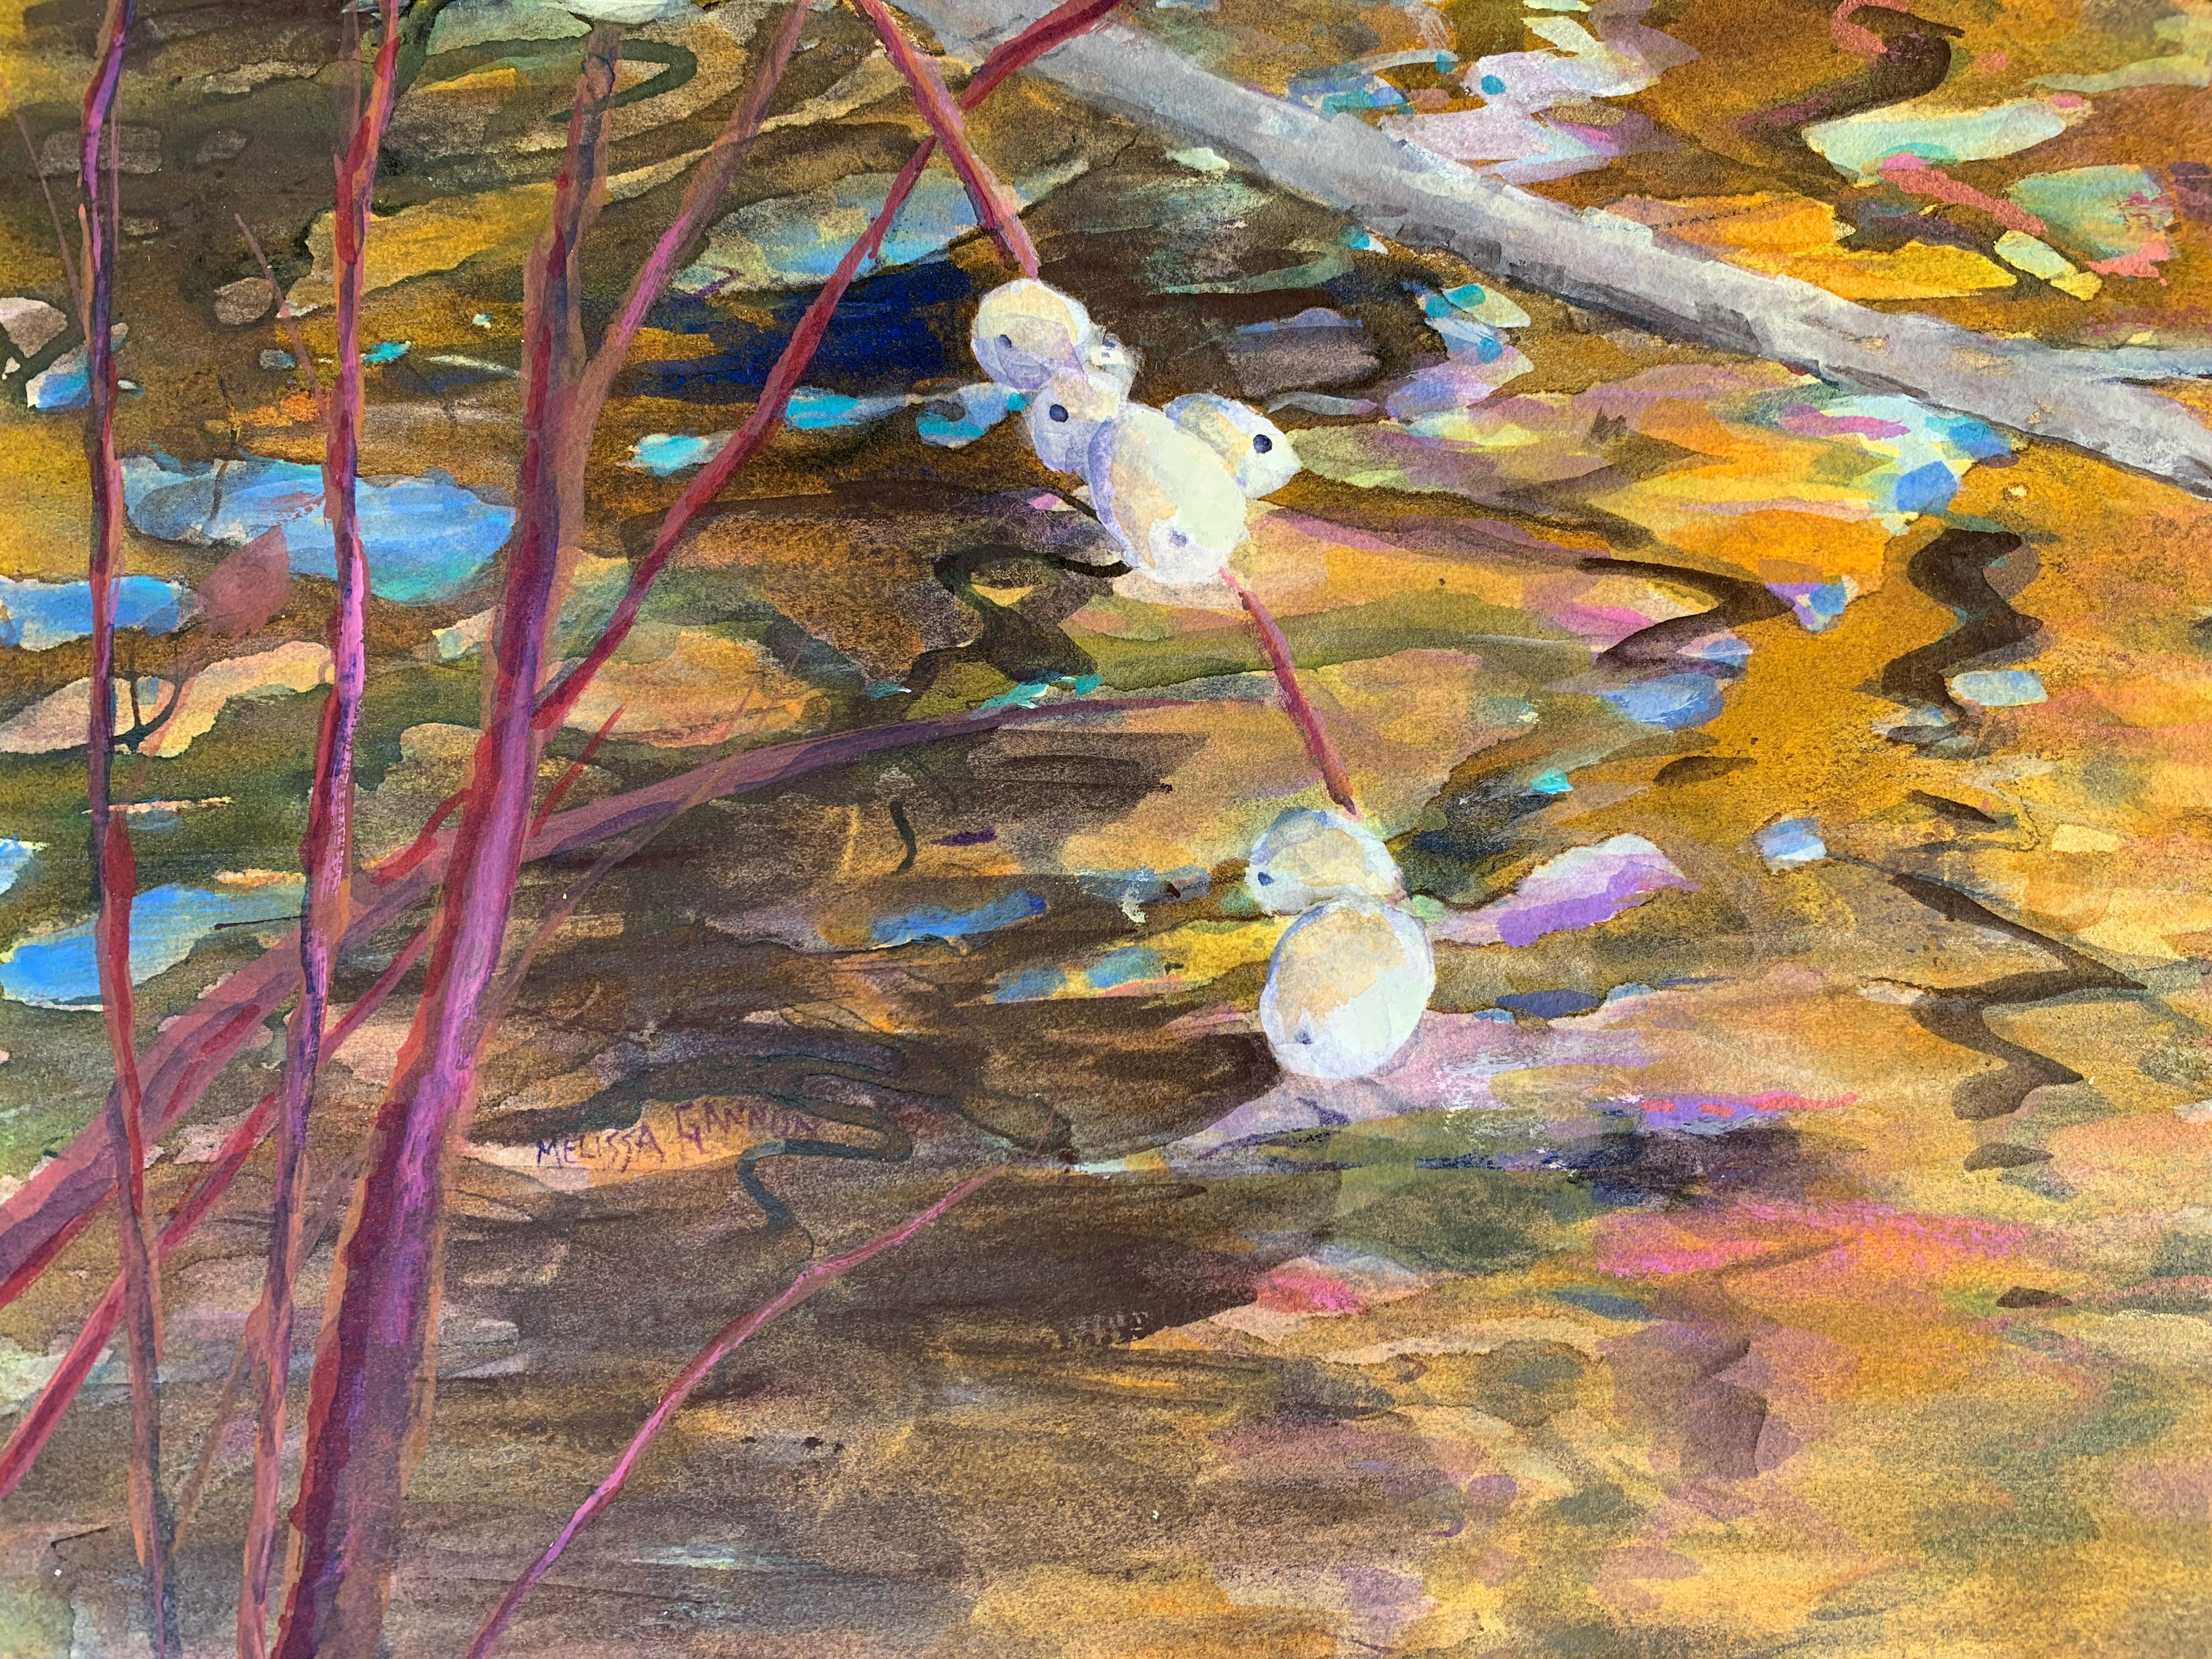 Thoughts of Spring, Original Painting - Abstract Impressionist Mixed Media Art by Melissa Gannon